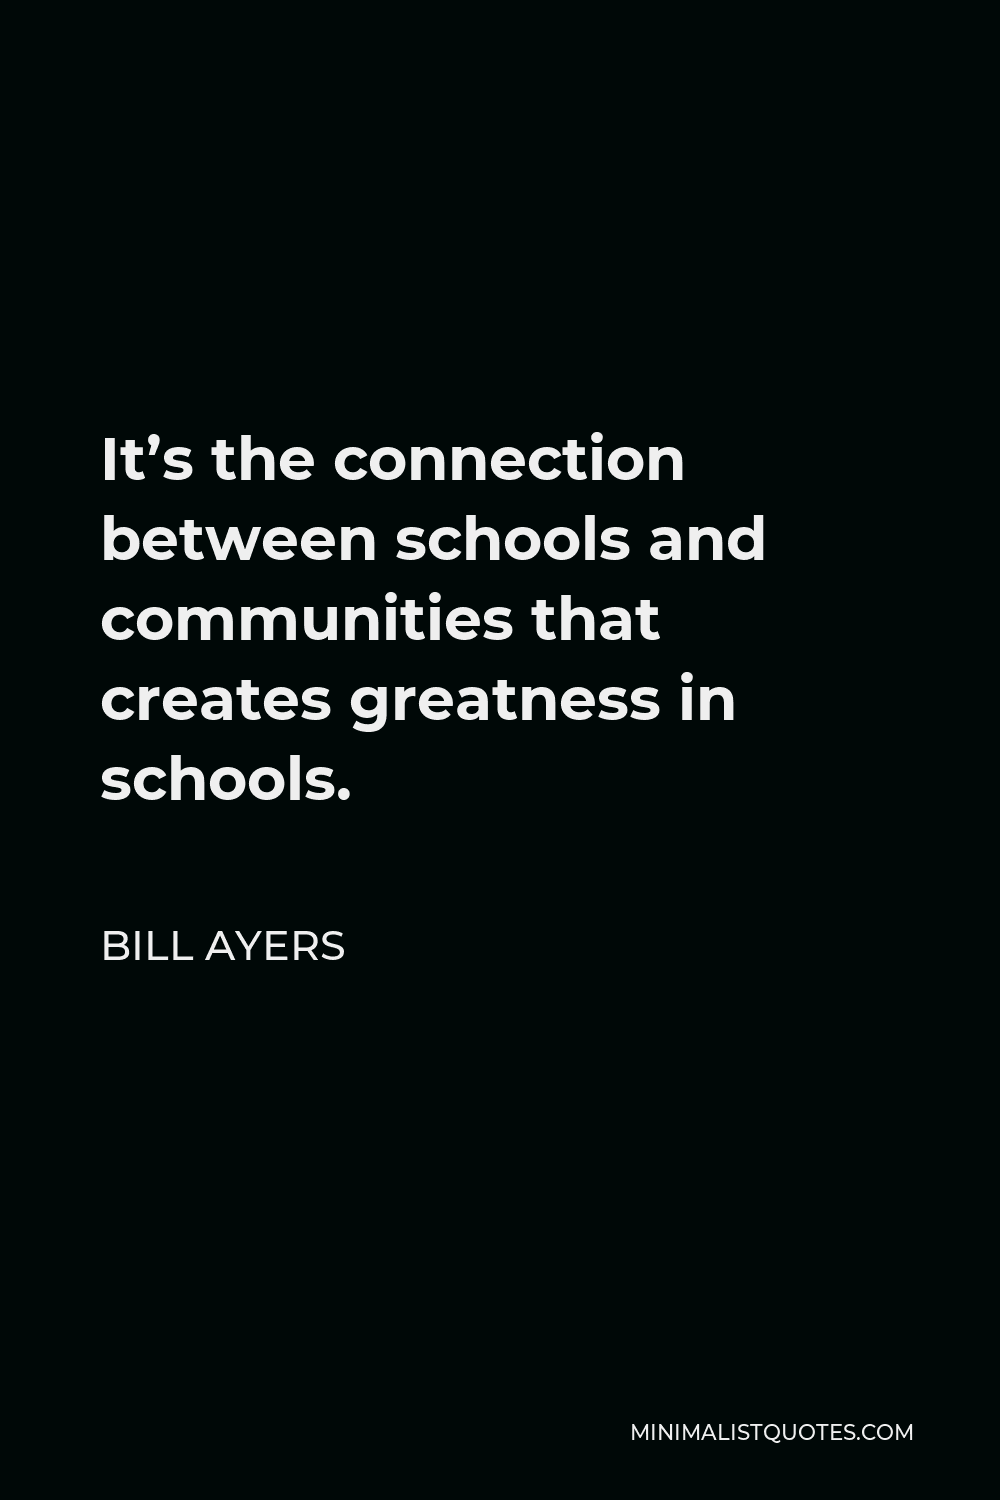 Bill Ayers Quote - It’s the connection between schools and communities that creates greatness in schools.